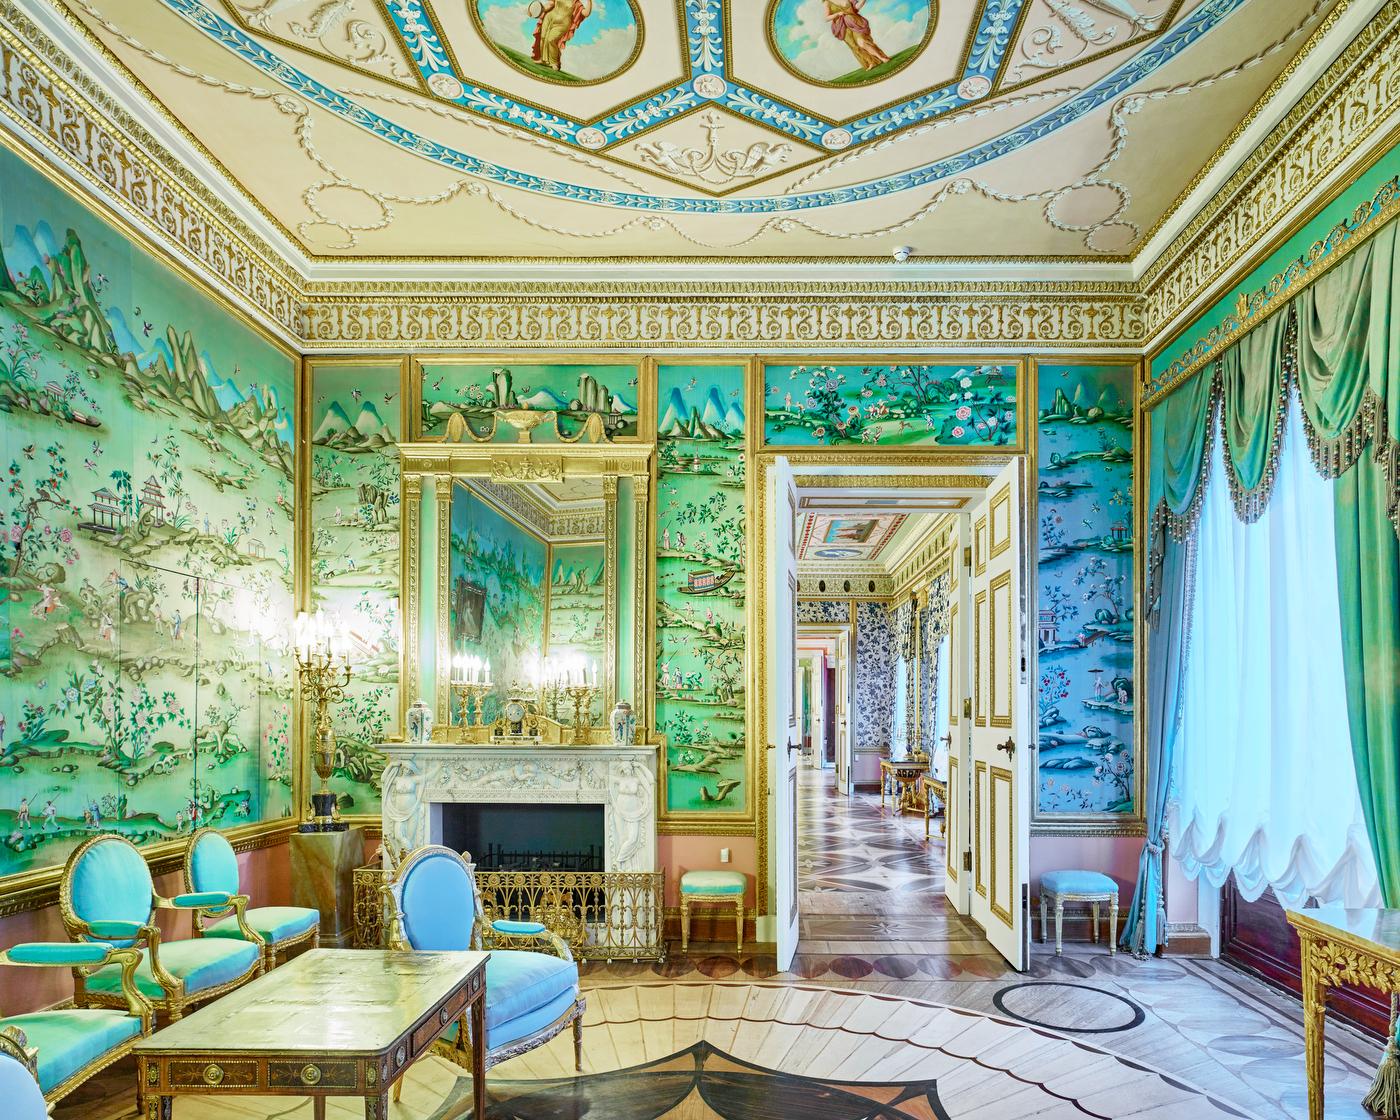 Title: Blue Drawing Room. Catherine Palace. Pushkin, Russia

All available sizes & editions for each size of this photograph:
21” x 26" Edition of 7
32” x 40" Edition of 7
44” x 55” Edition of 10
59” x 73.5” Edition of 5

Burdeny’s Russia images,